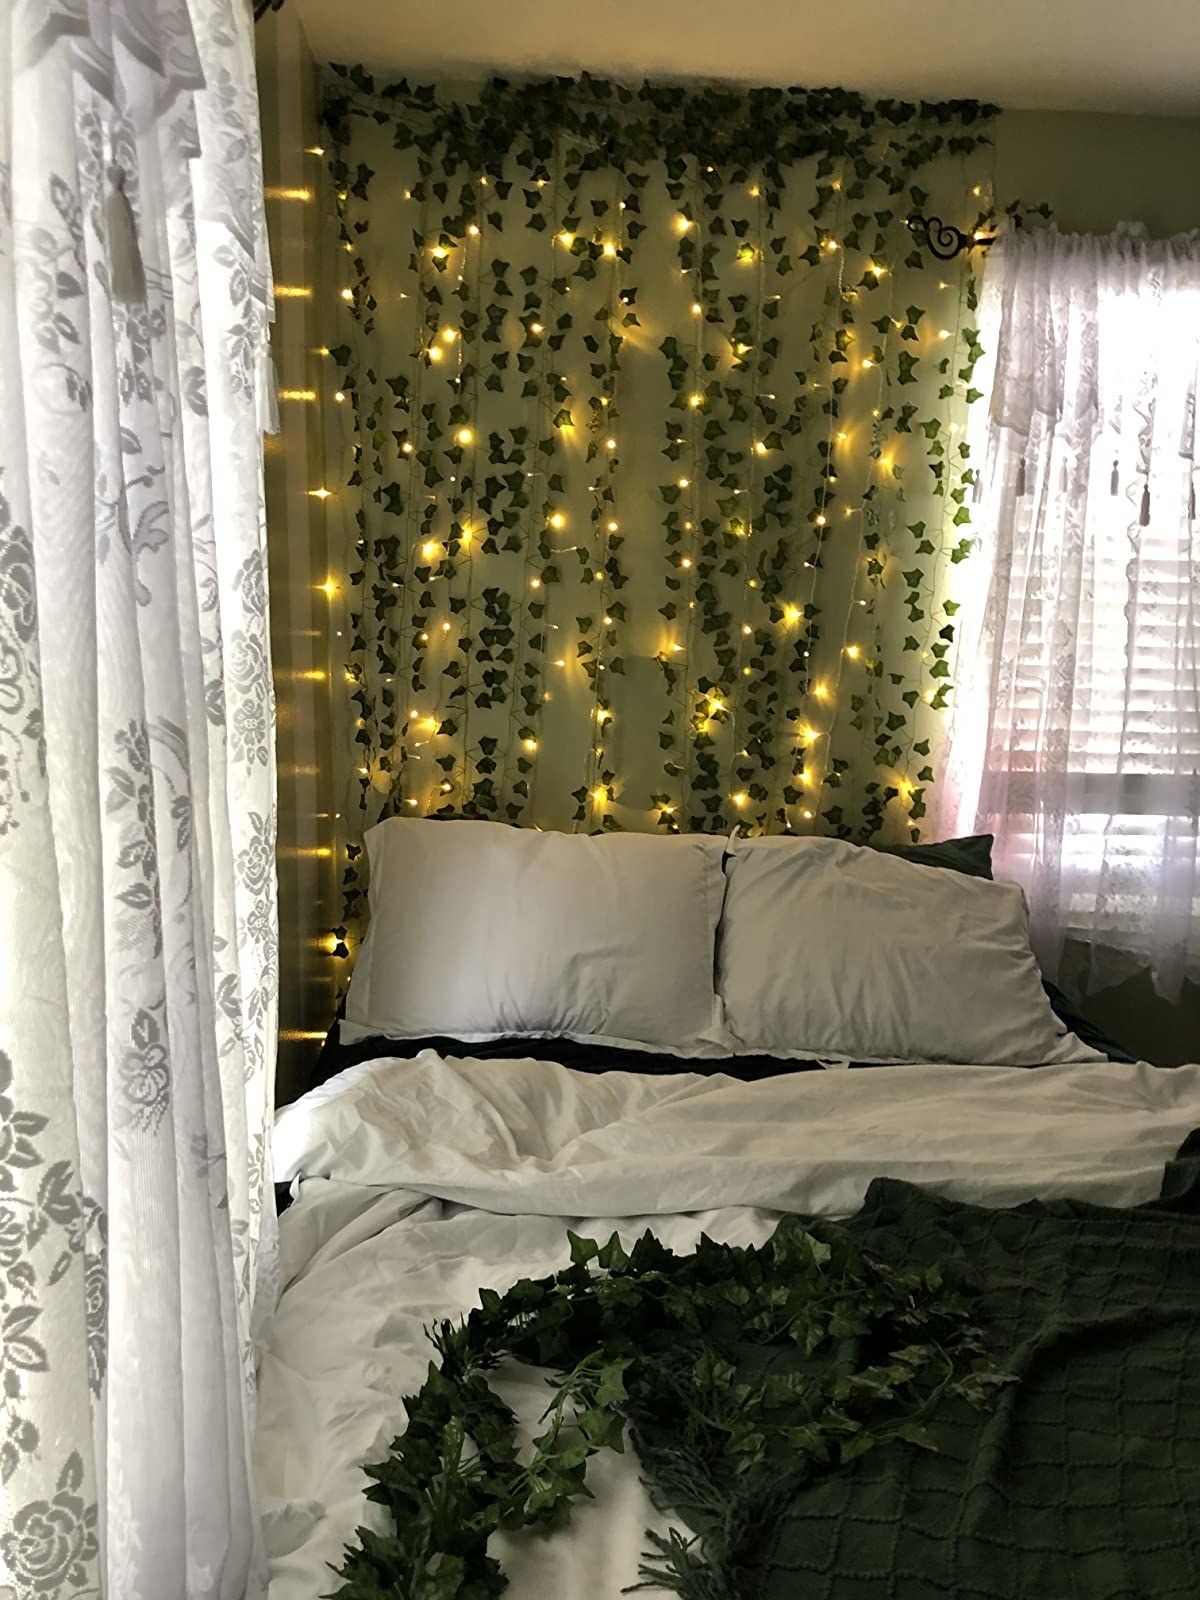 reviewer showing the lights and ivy above their bed